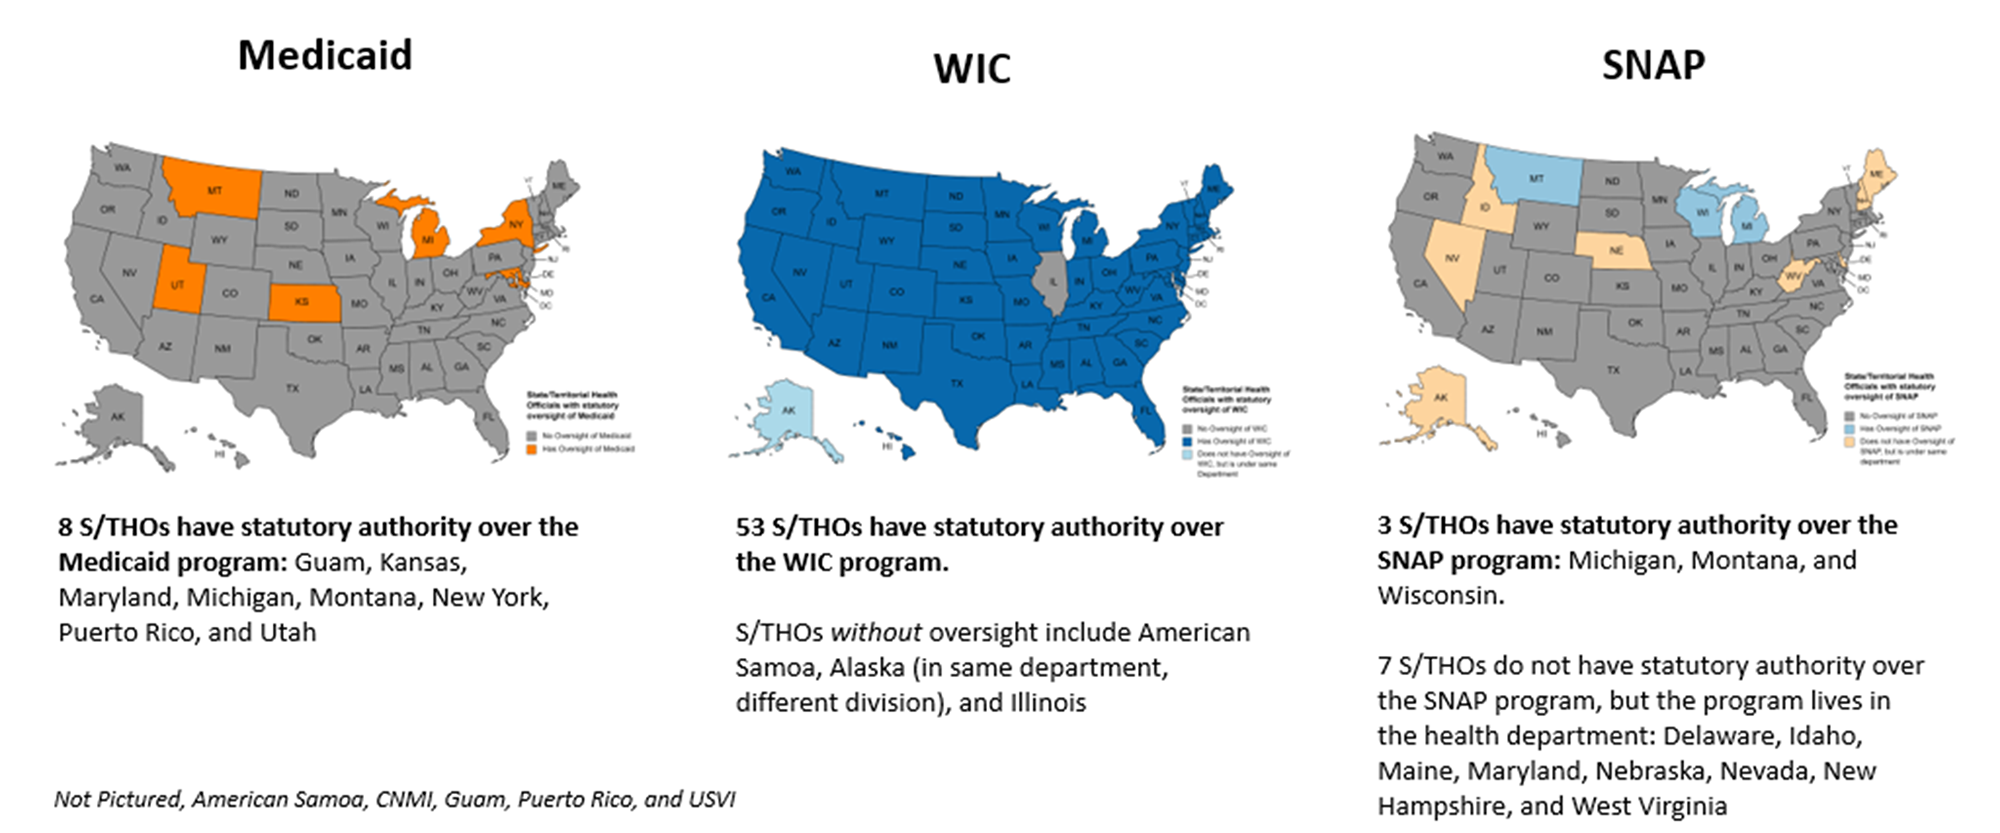 Three color-coded maps (for Medicaid, WIC, and SNAP, respectively) showing different S/THO oversight of programs impacting food security.